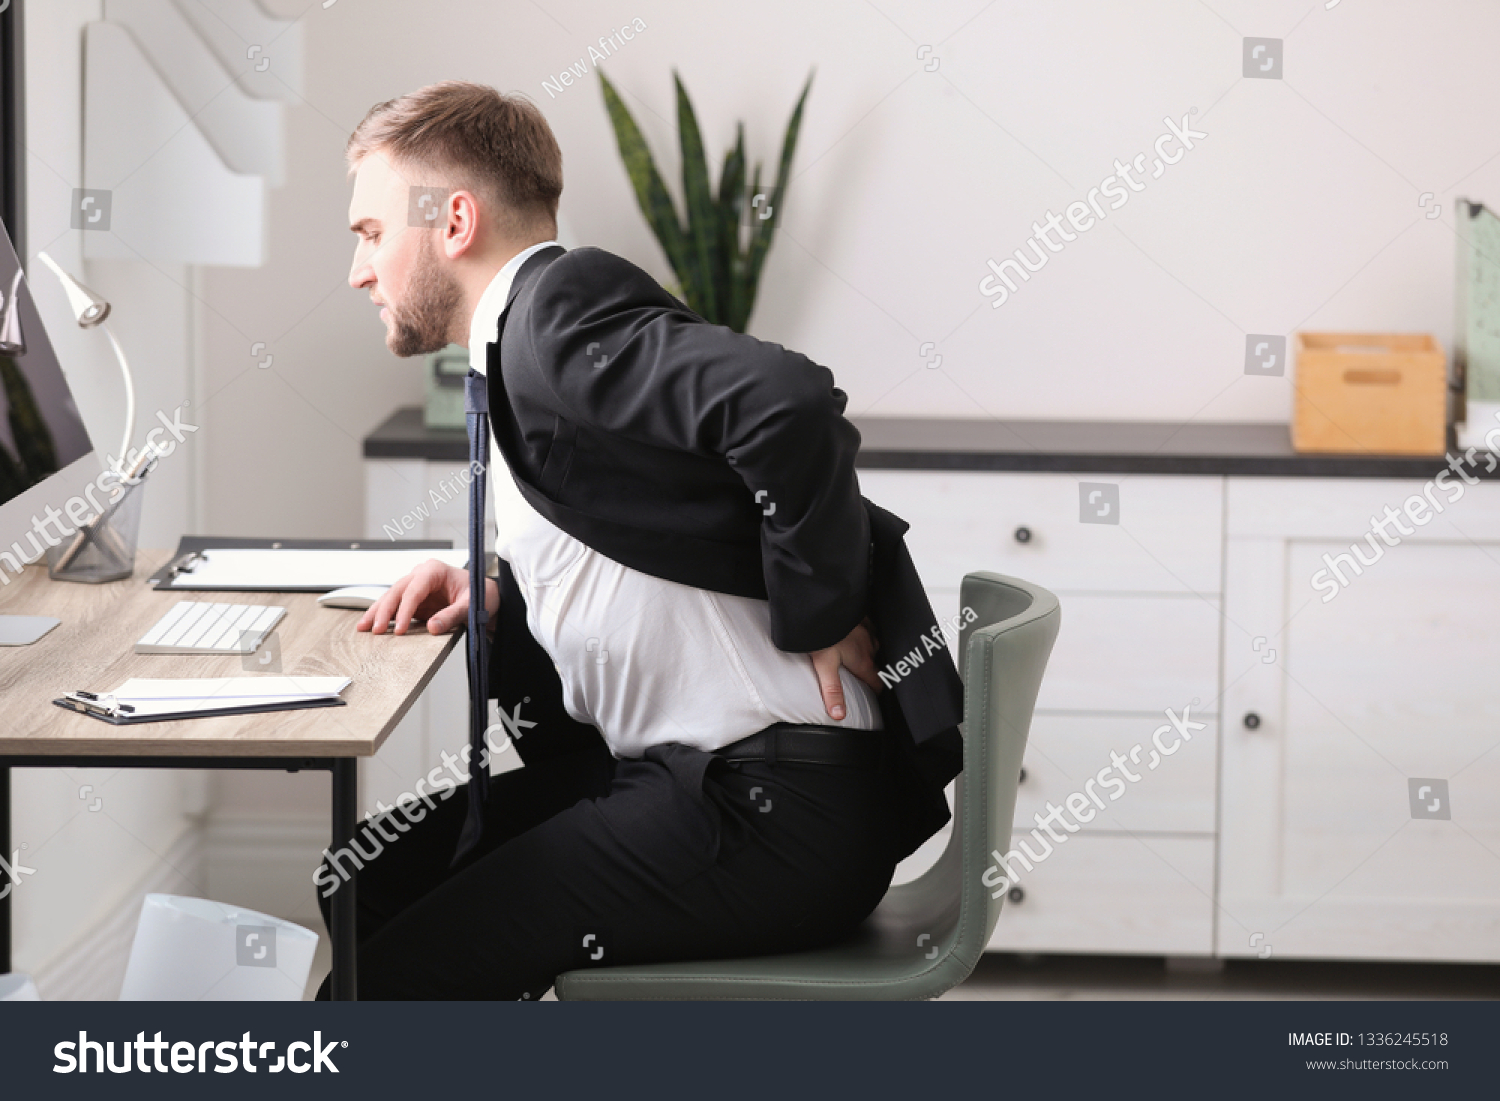 Businessman suffering from back pain at workplace #1336245518